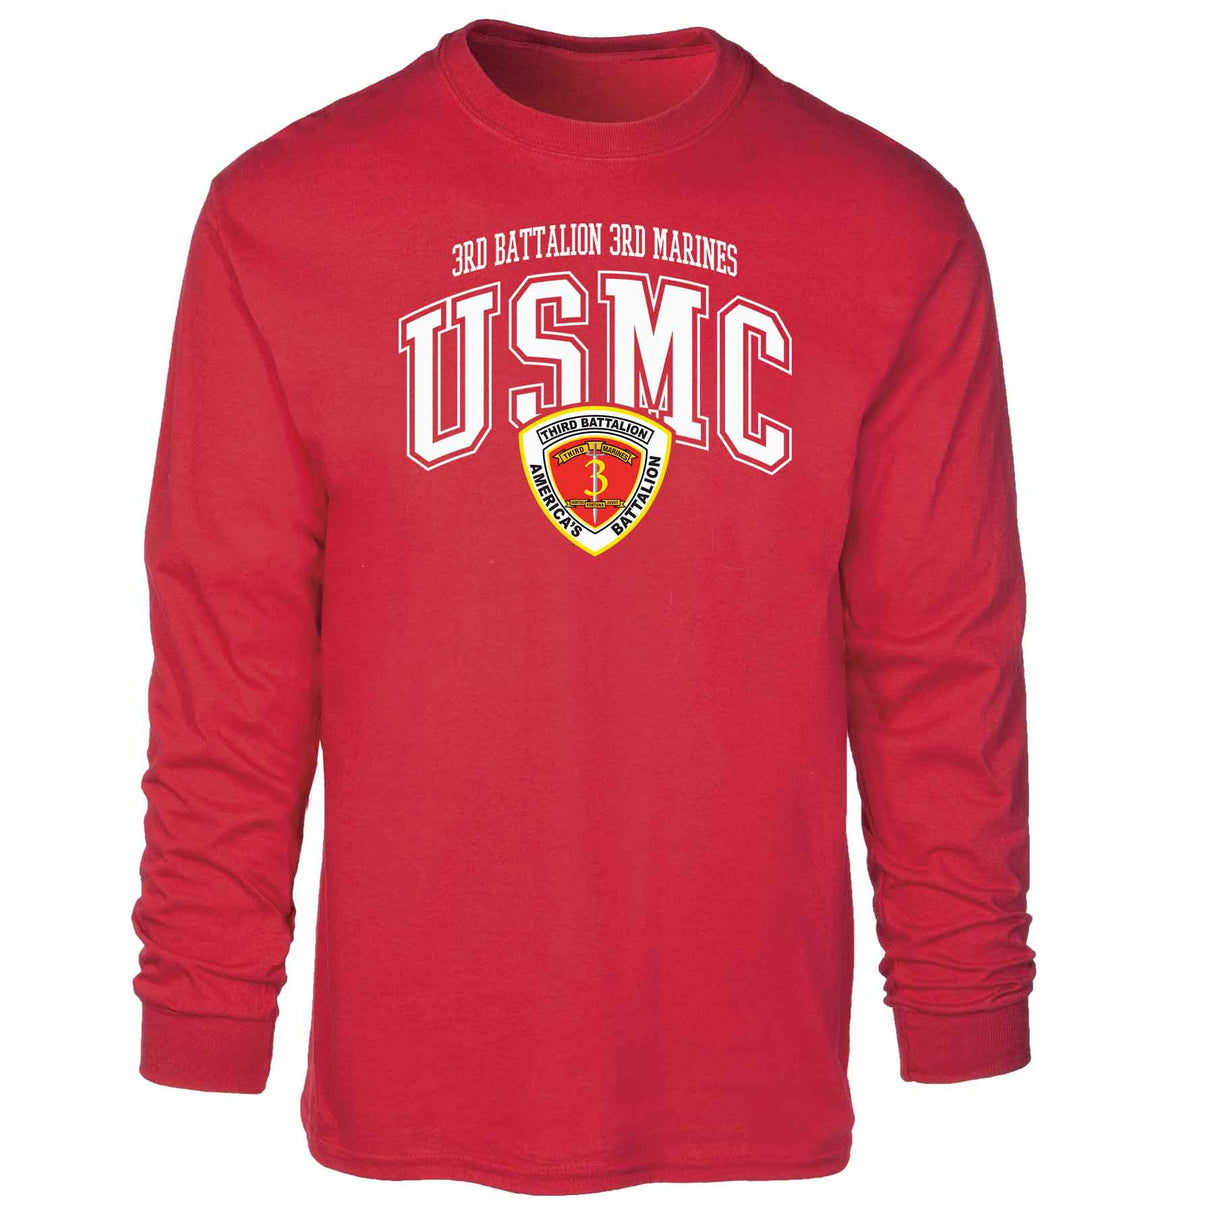 3rd Battalion 3rd Marines Arched Long Sleeve T-shirt - SGT GRIT